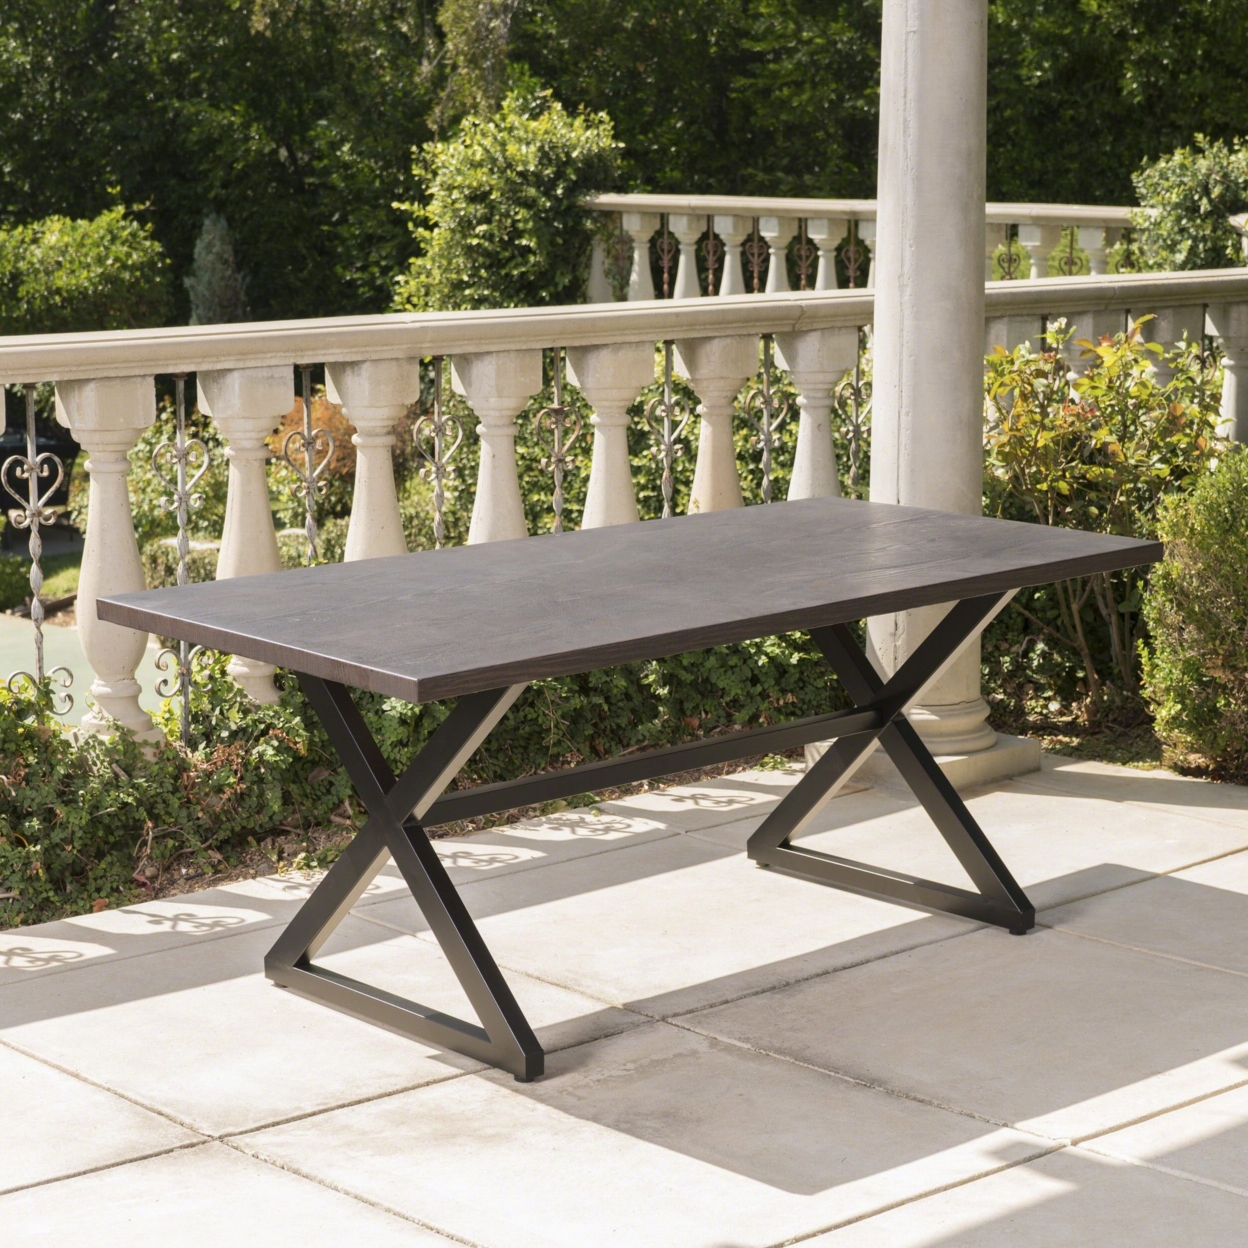 Rosarito Outdoor Aluminum Dining Table With Black Steel Frame - Brown